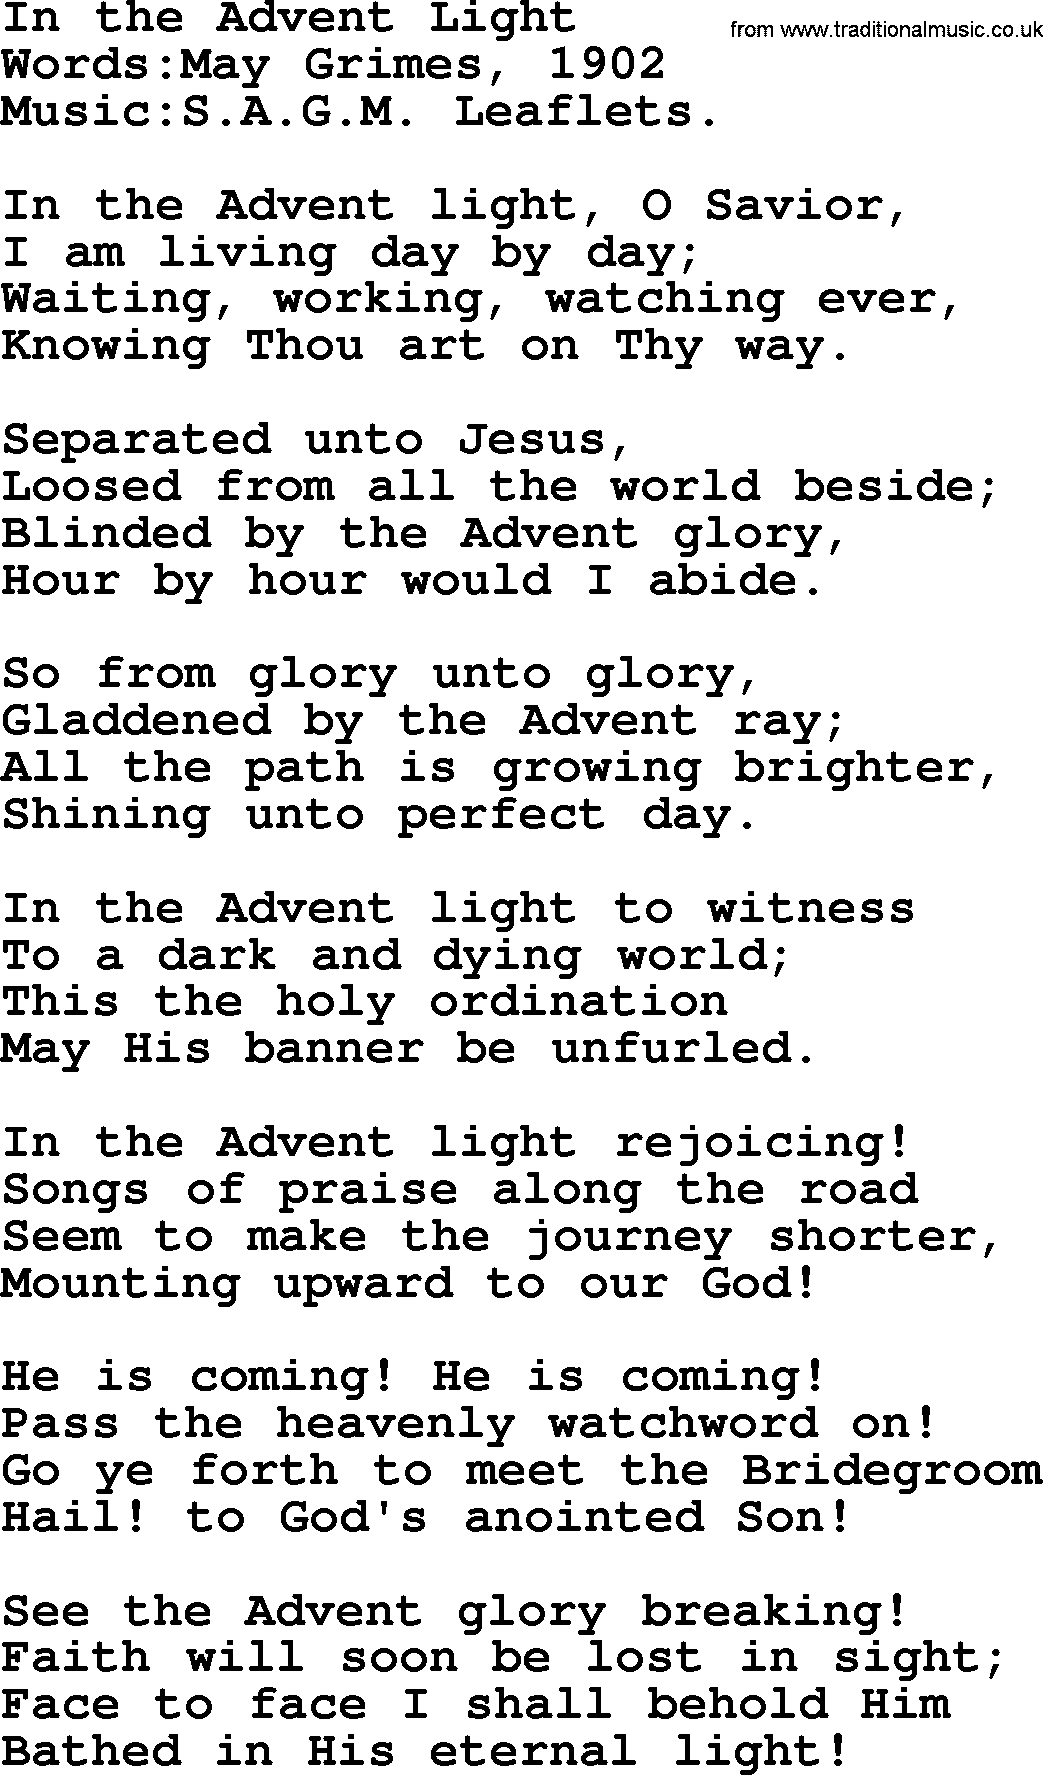 Christian hymns and songs about Jesus' Return(The Second Coming): In The Advent Light, lyrics with PDF